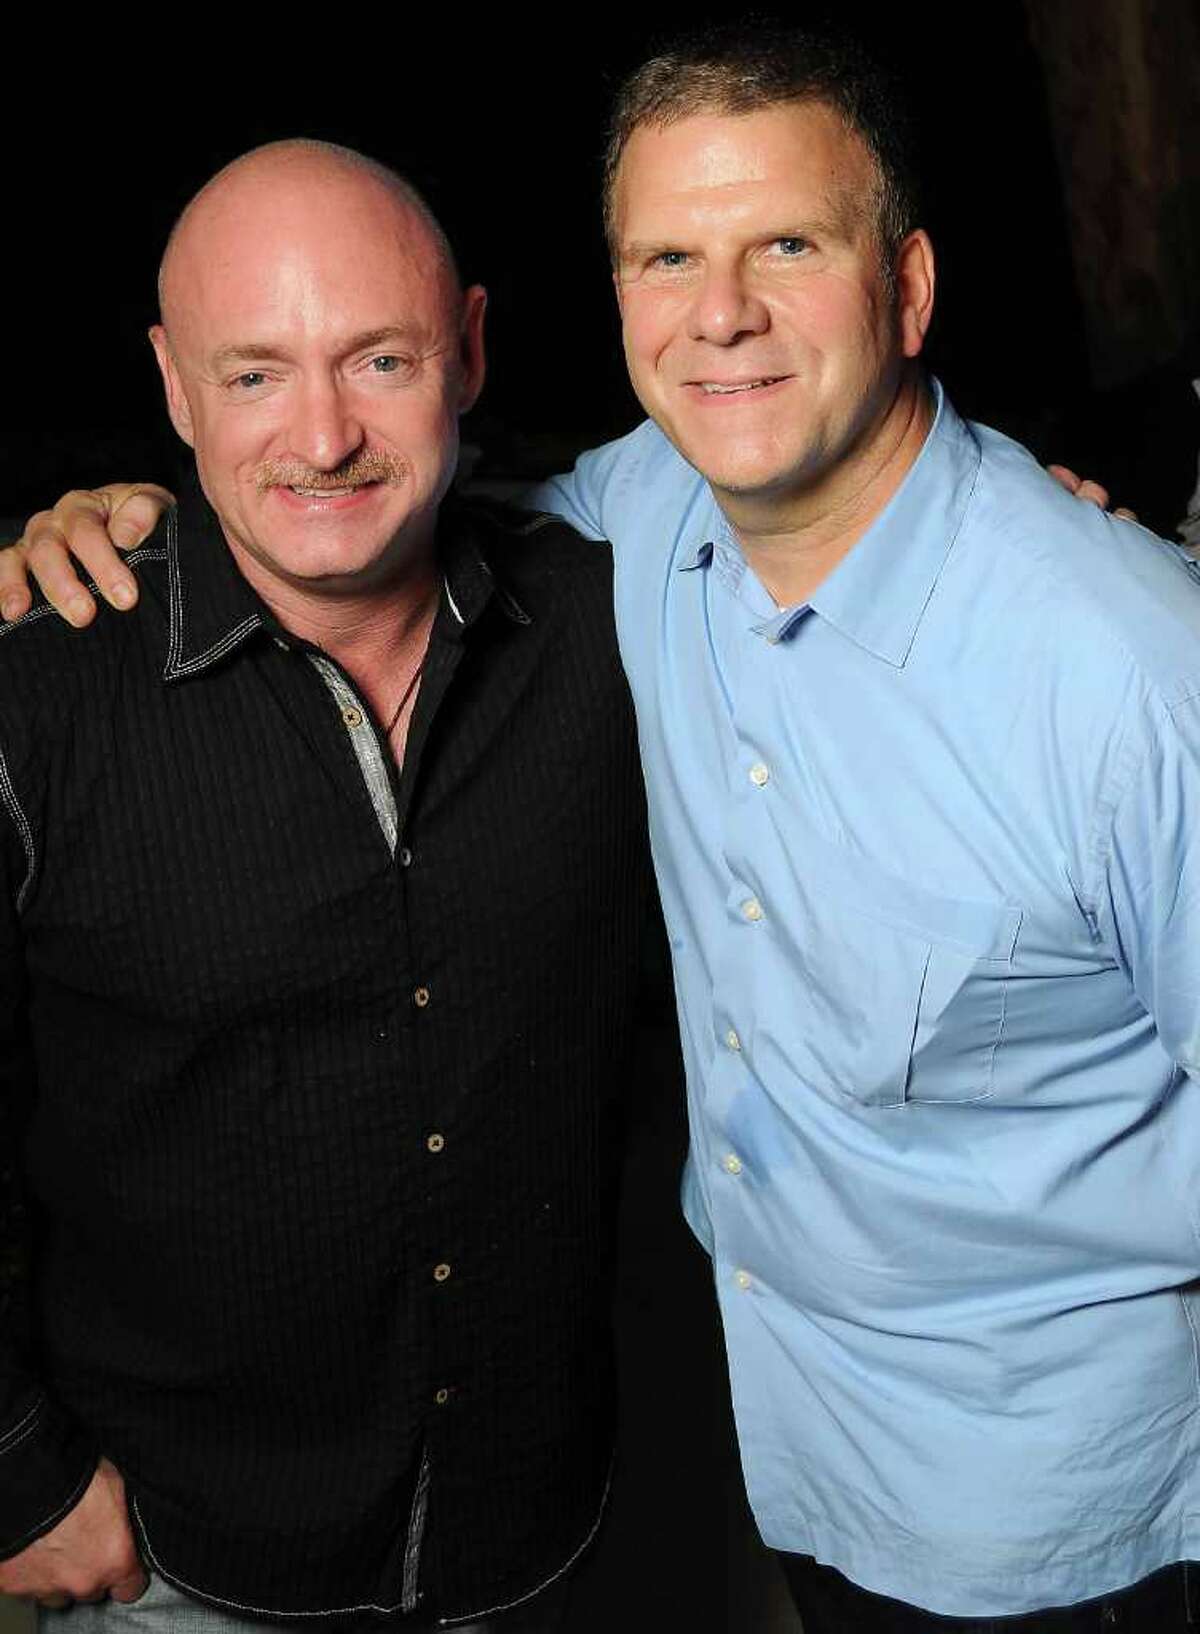 Astronaut Mark Kelly and Tilman Fertitta at the Gathering of Champions benefitting Houston Children's Charity at Fertitta's home Wednesday April 13,2011.(Dave Rossman/For the Chronicle)